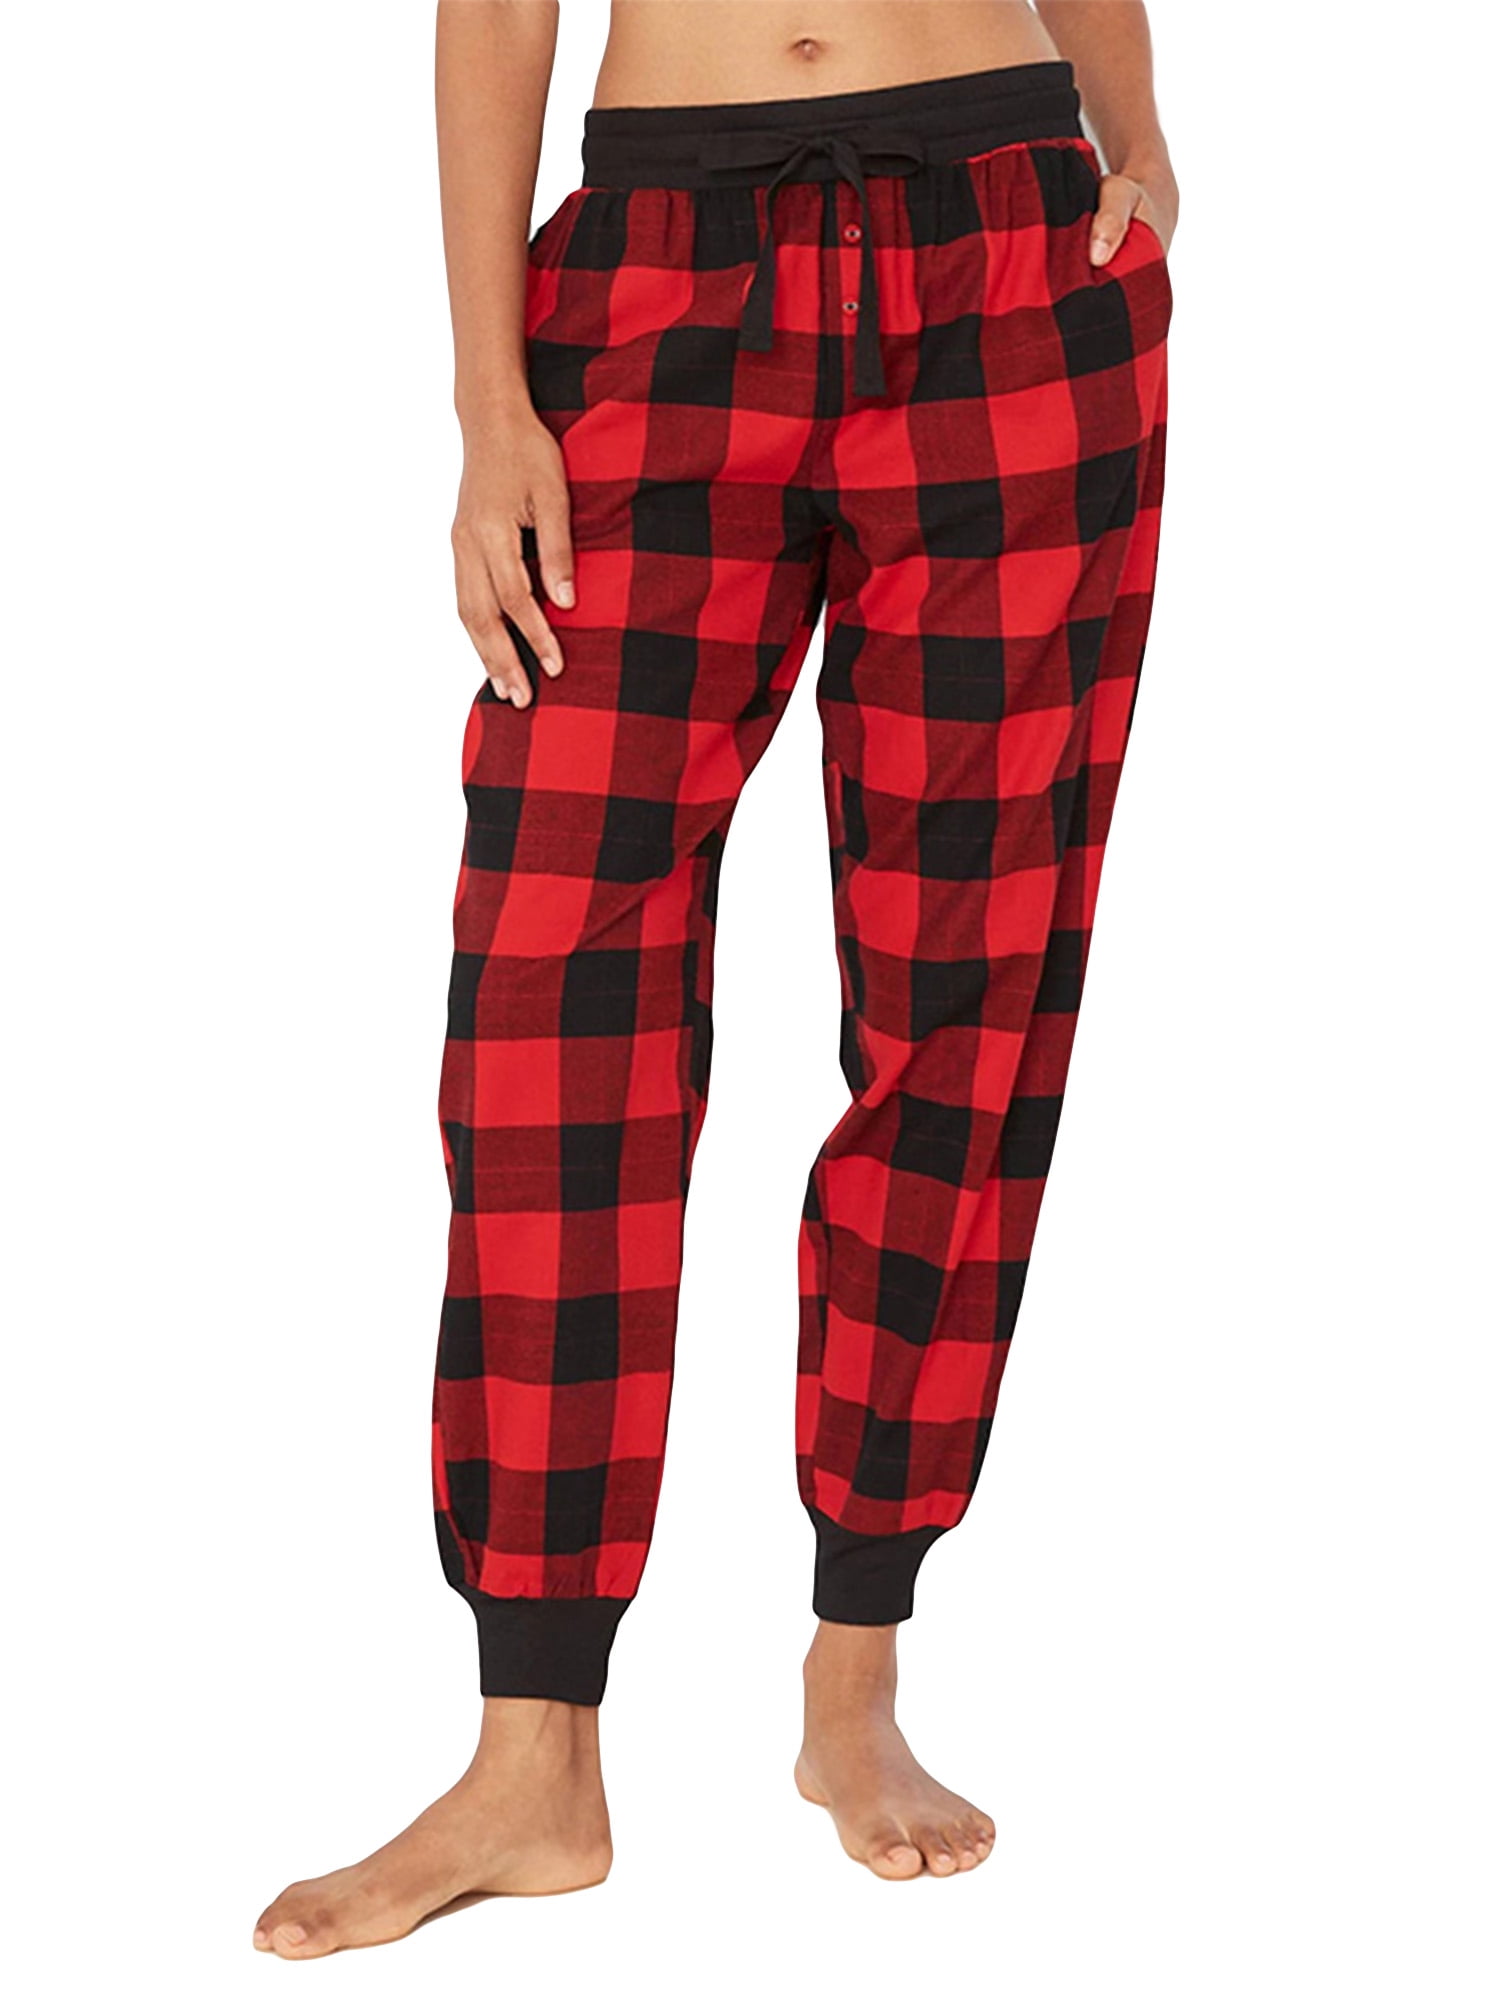 Niuer Hight Waist Casual Loose Fit Pants For Women Check Plaid Pajamas ...